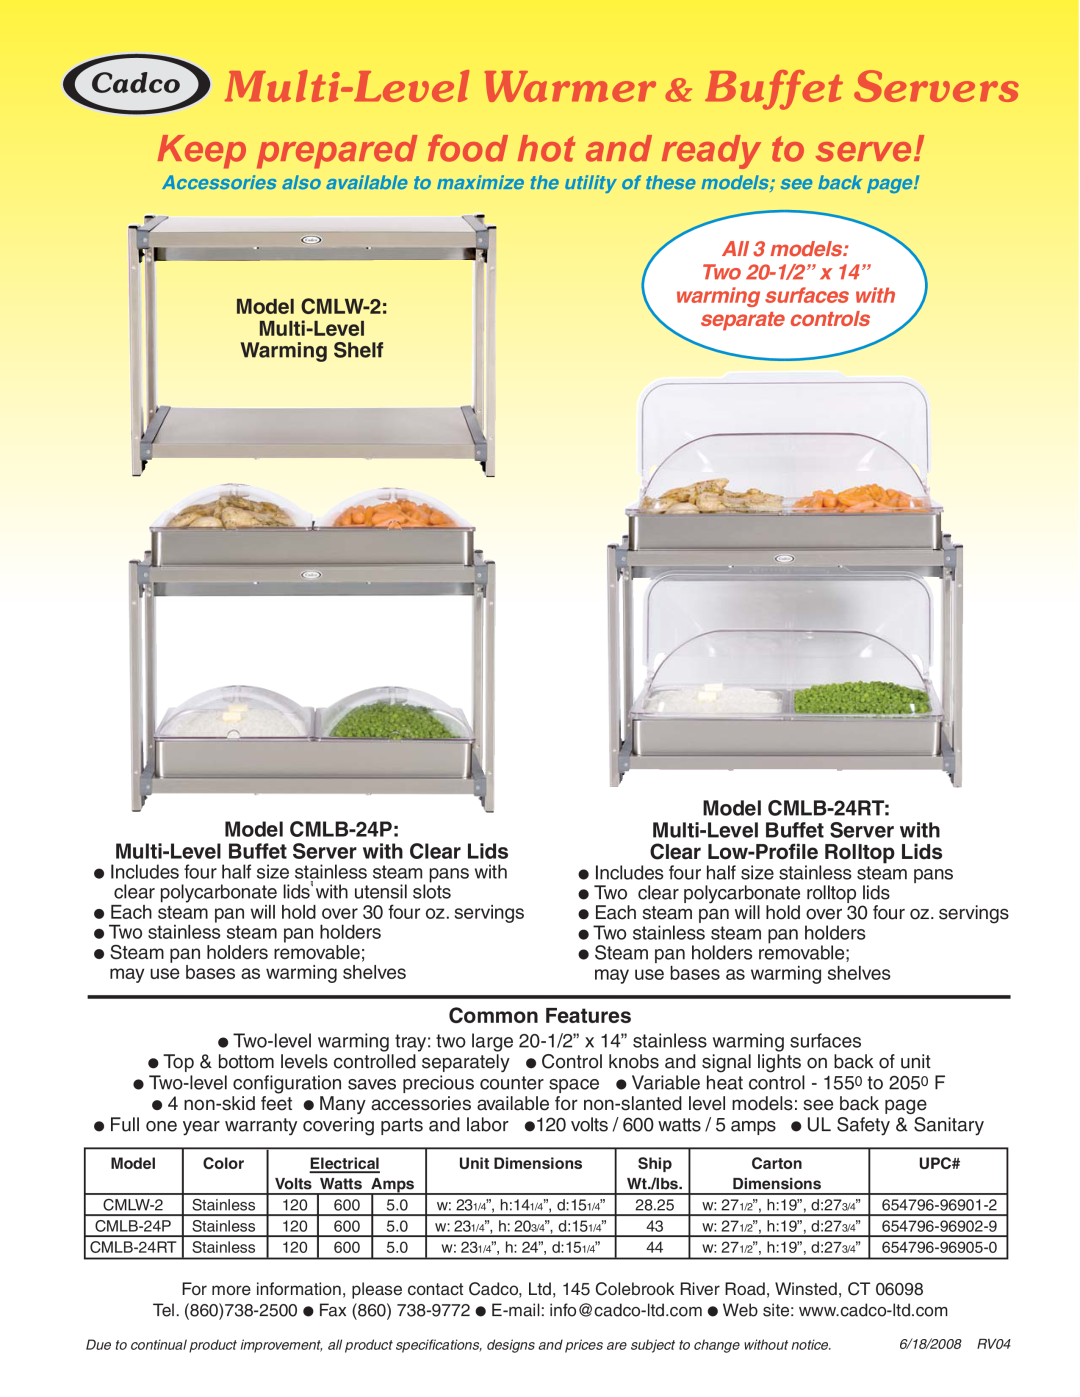 Cadco CMLB-24P warranty Multi-Level Warmer & Buffet Servers, Keep prepared food hot and ready to serve, Common Features 